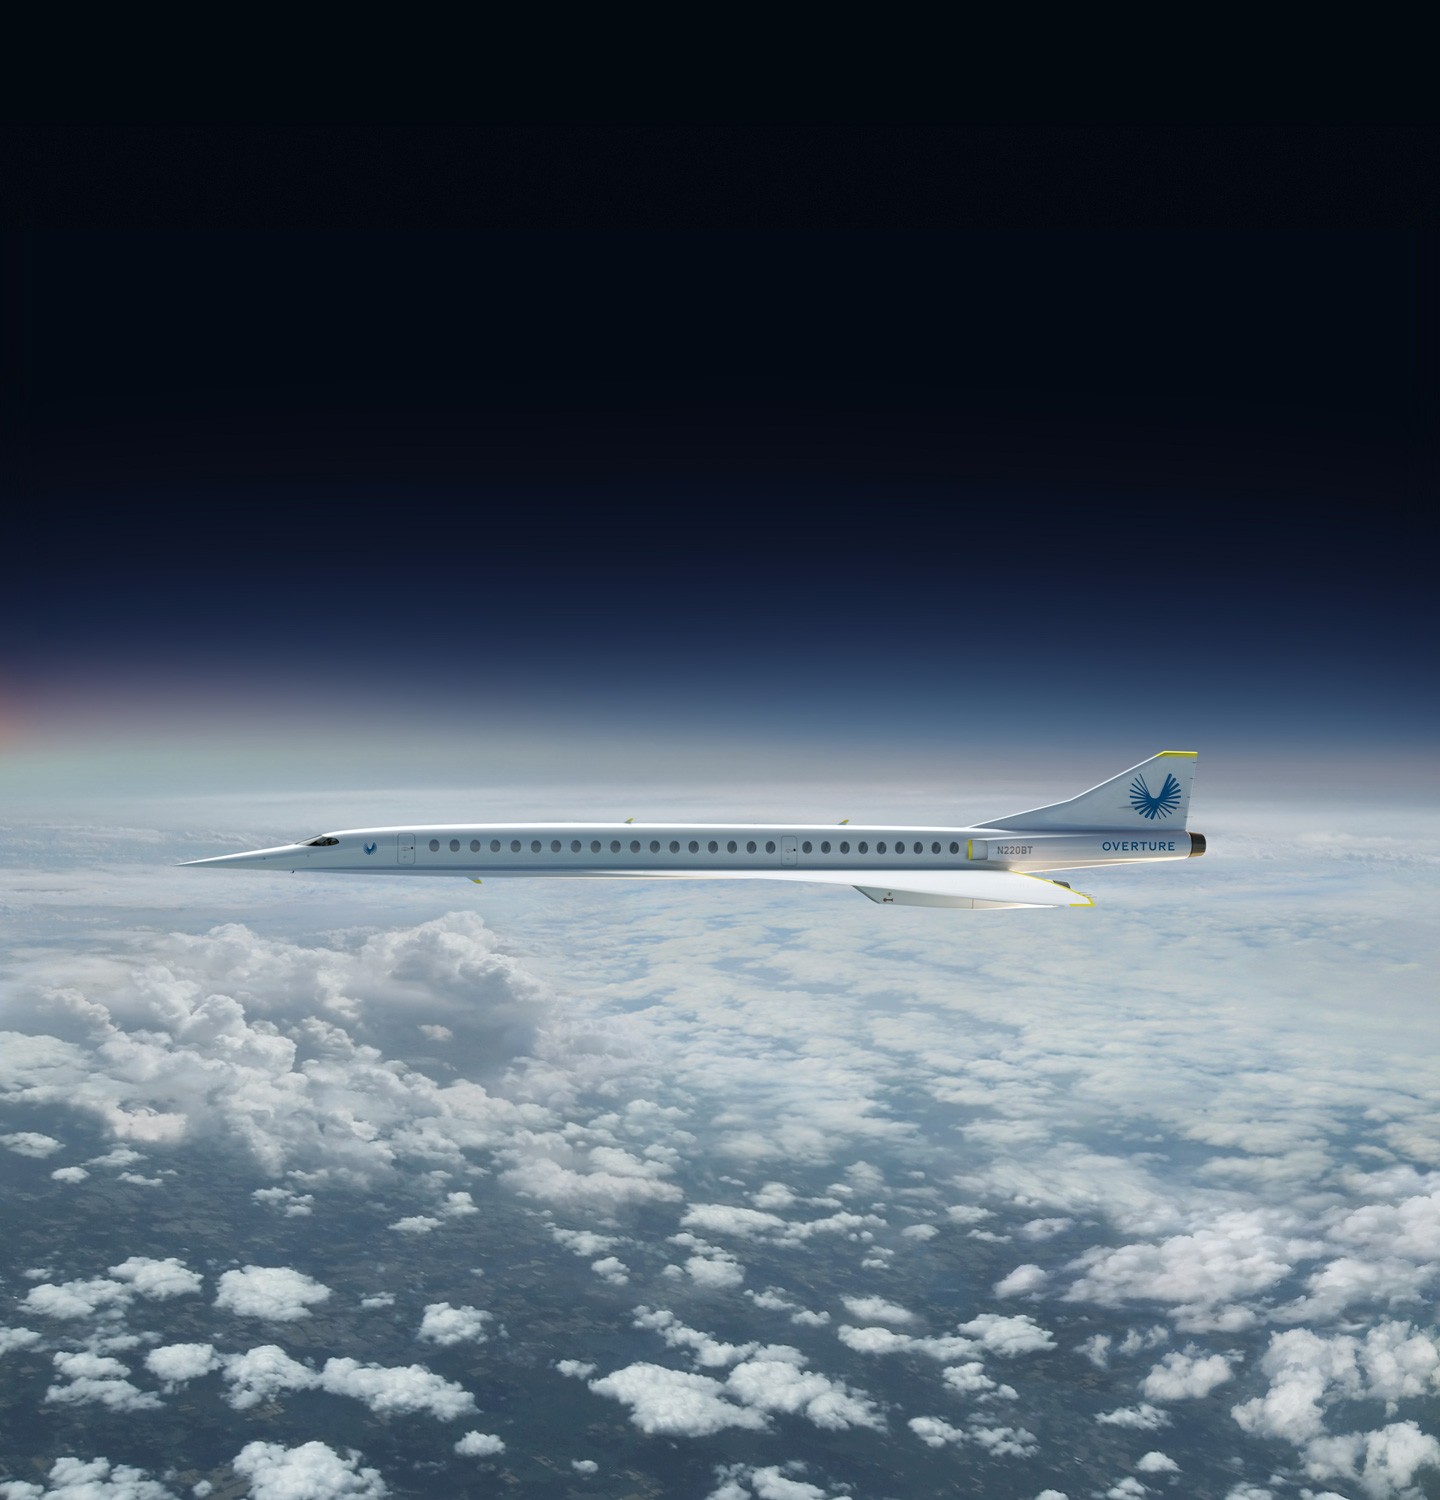 A rendering of the Overture supersonic aircraft from Boom Supersonic. Image via Boom Supersonic.